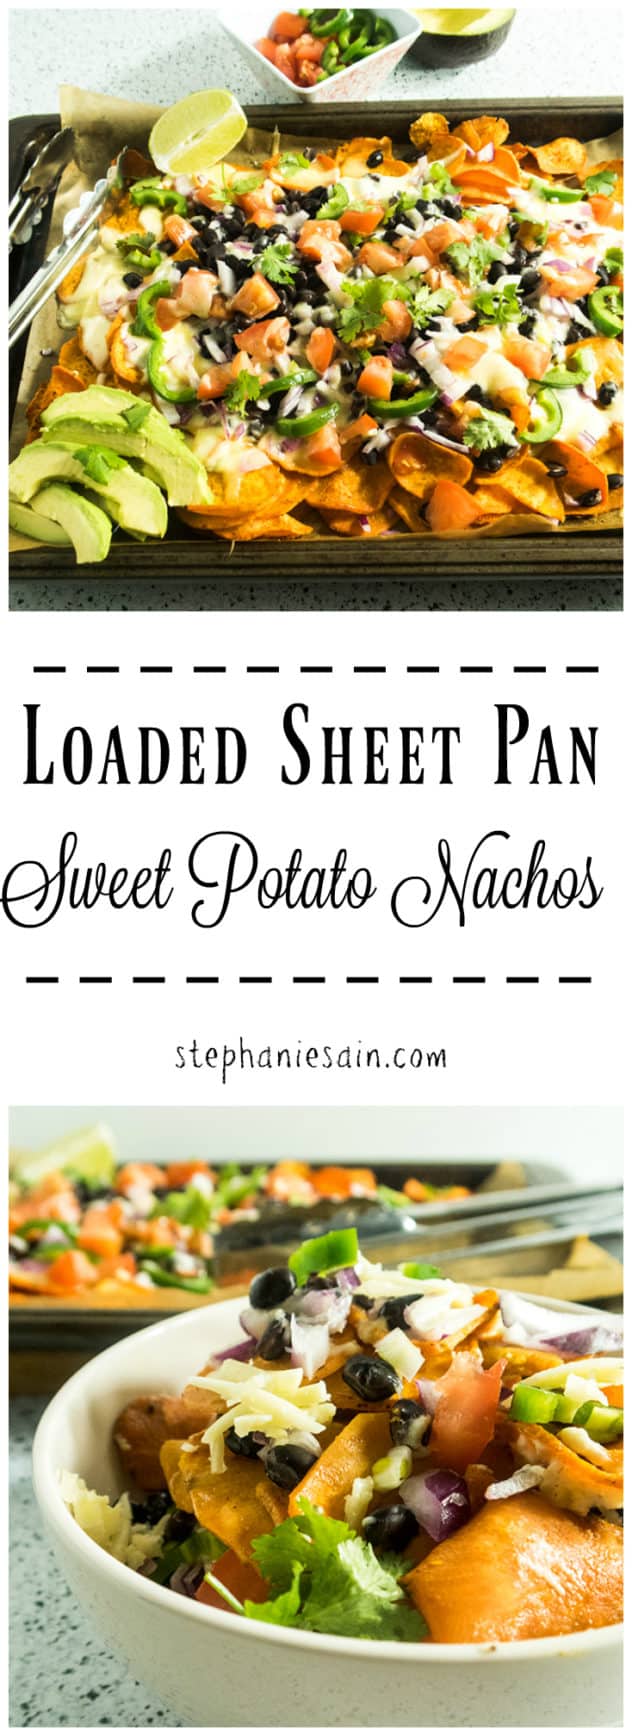 Loaded Sheet Pan Sweet Potato Nachos are a tasty, healthier twist on nachos. Topped with a creamy sauce and all your favorite nacho toppings. Vegetarian, Gluten Free & Vegan option.